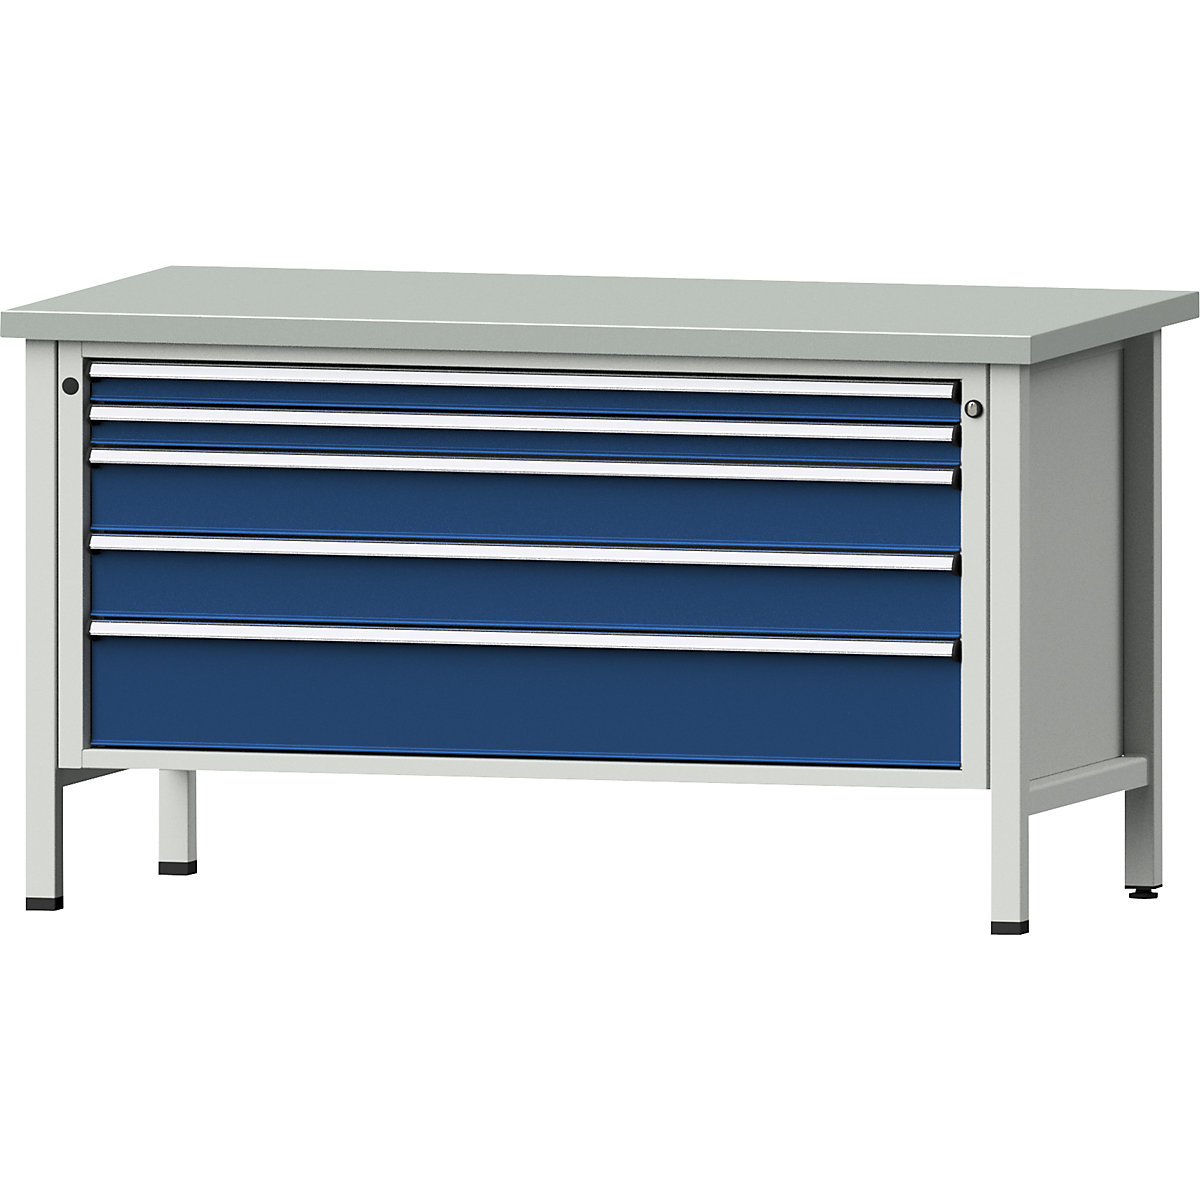 Workbench with XL/XXL drawers, frame construction – ANKE, width 1500 mm, 5 drawers, sheet steel covered worktop, front in gentian blue-8